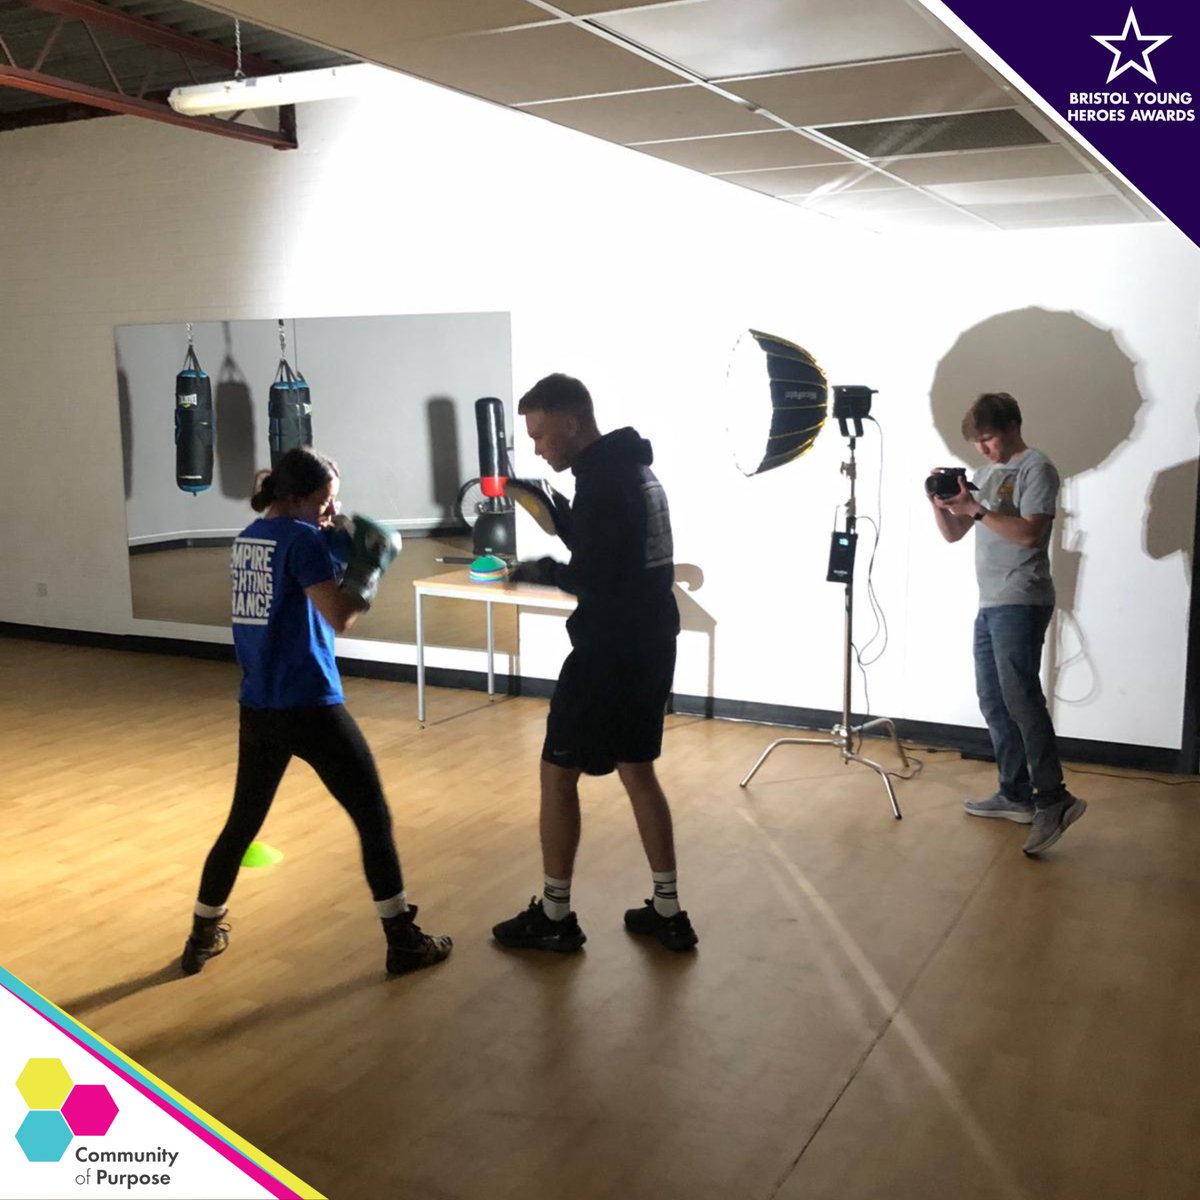 Today we were out for day two of filming our Bristol Young Heroes Finalists📽️ We have visited Youth Moves, Empire Fighting Chance and are finishing off the day at City Hall. Thank you to the wonderful Dougie from @theStudioDuo for carrying out the filming 🙏 #empoweringpeople